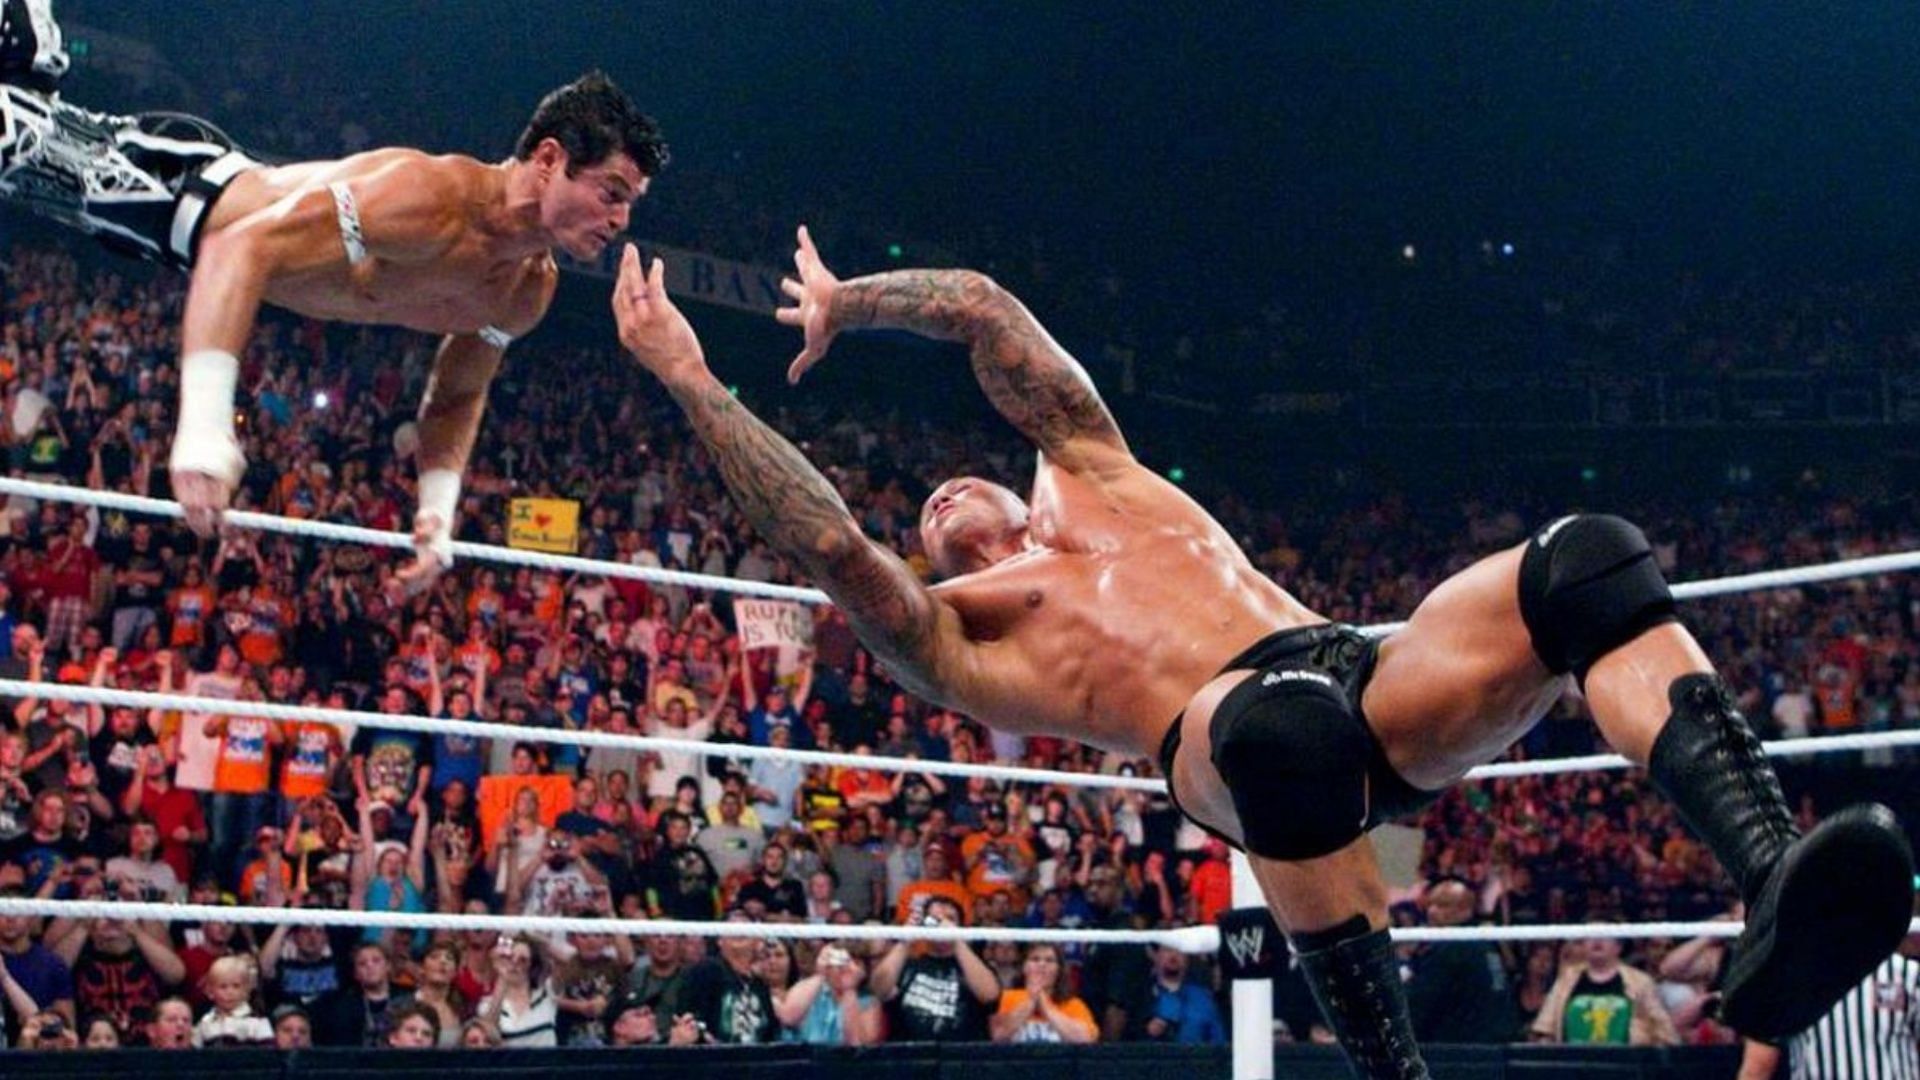 Randy Orton catches Evan Bourne in mid-air for an RKO.